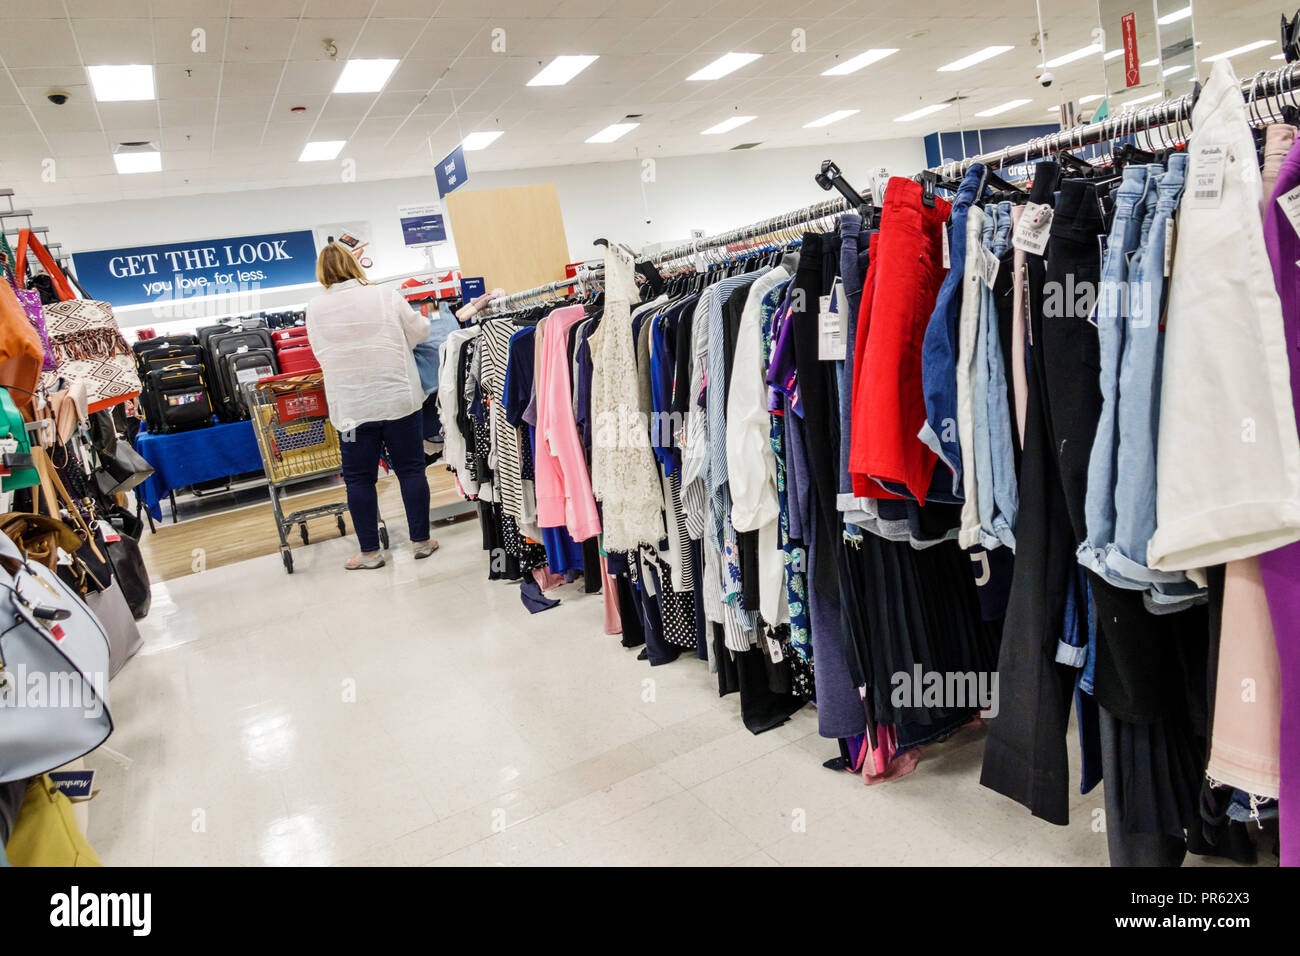 Miami Florida,Kendall,The Palms at Town & Country Mall,Marshalls discount department store,inside interior,shopping shopper shoppers shop shops market Stock Photo